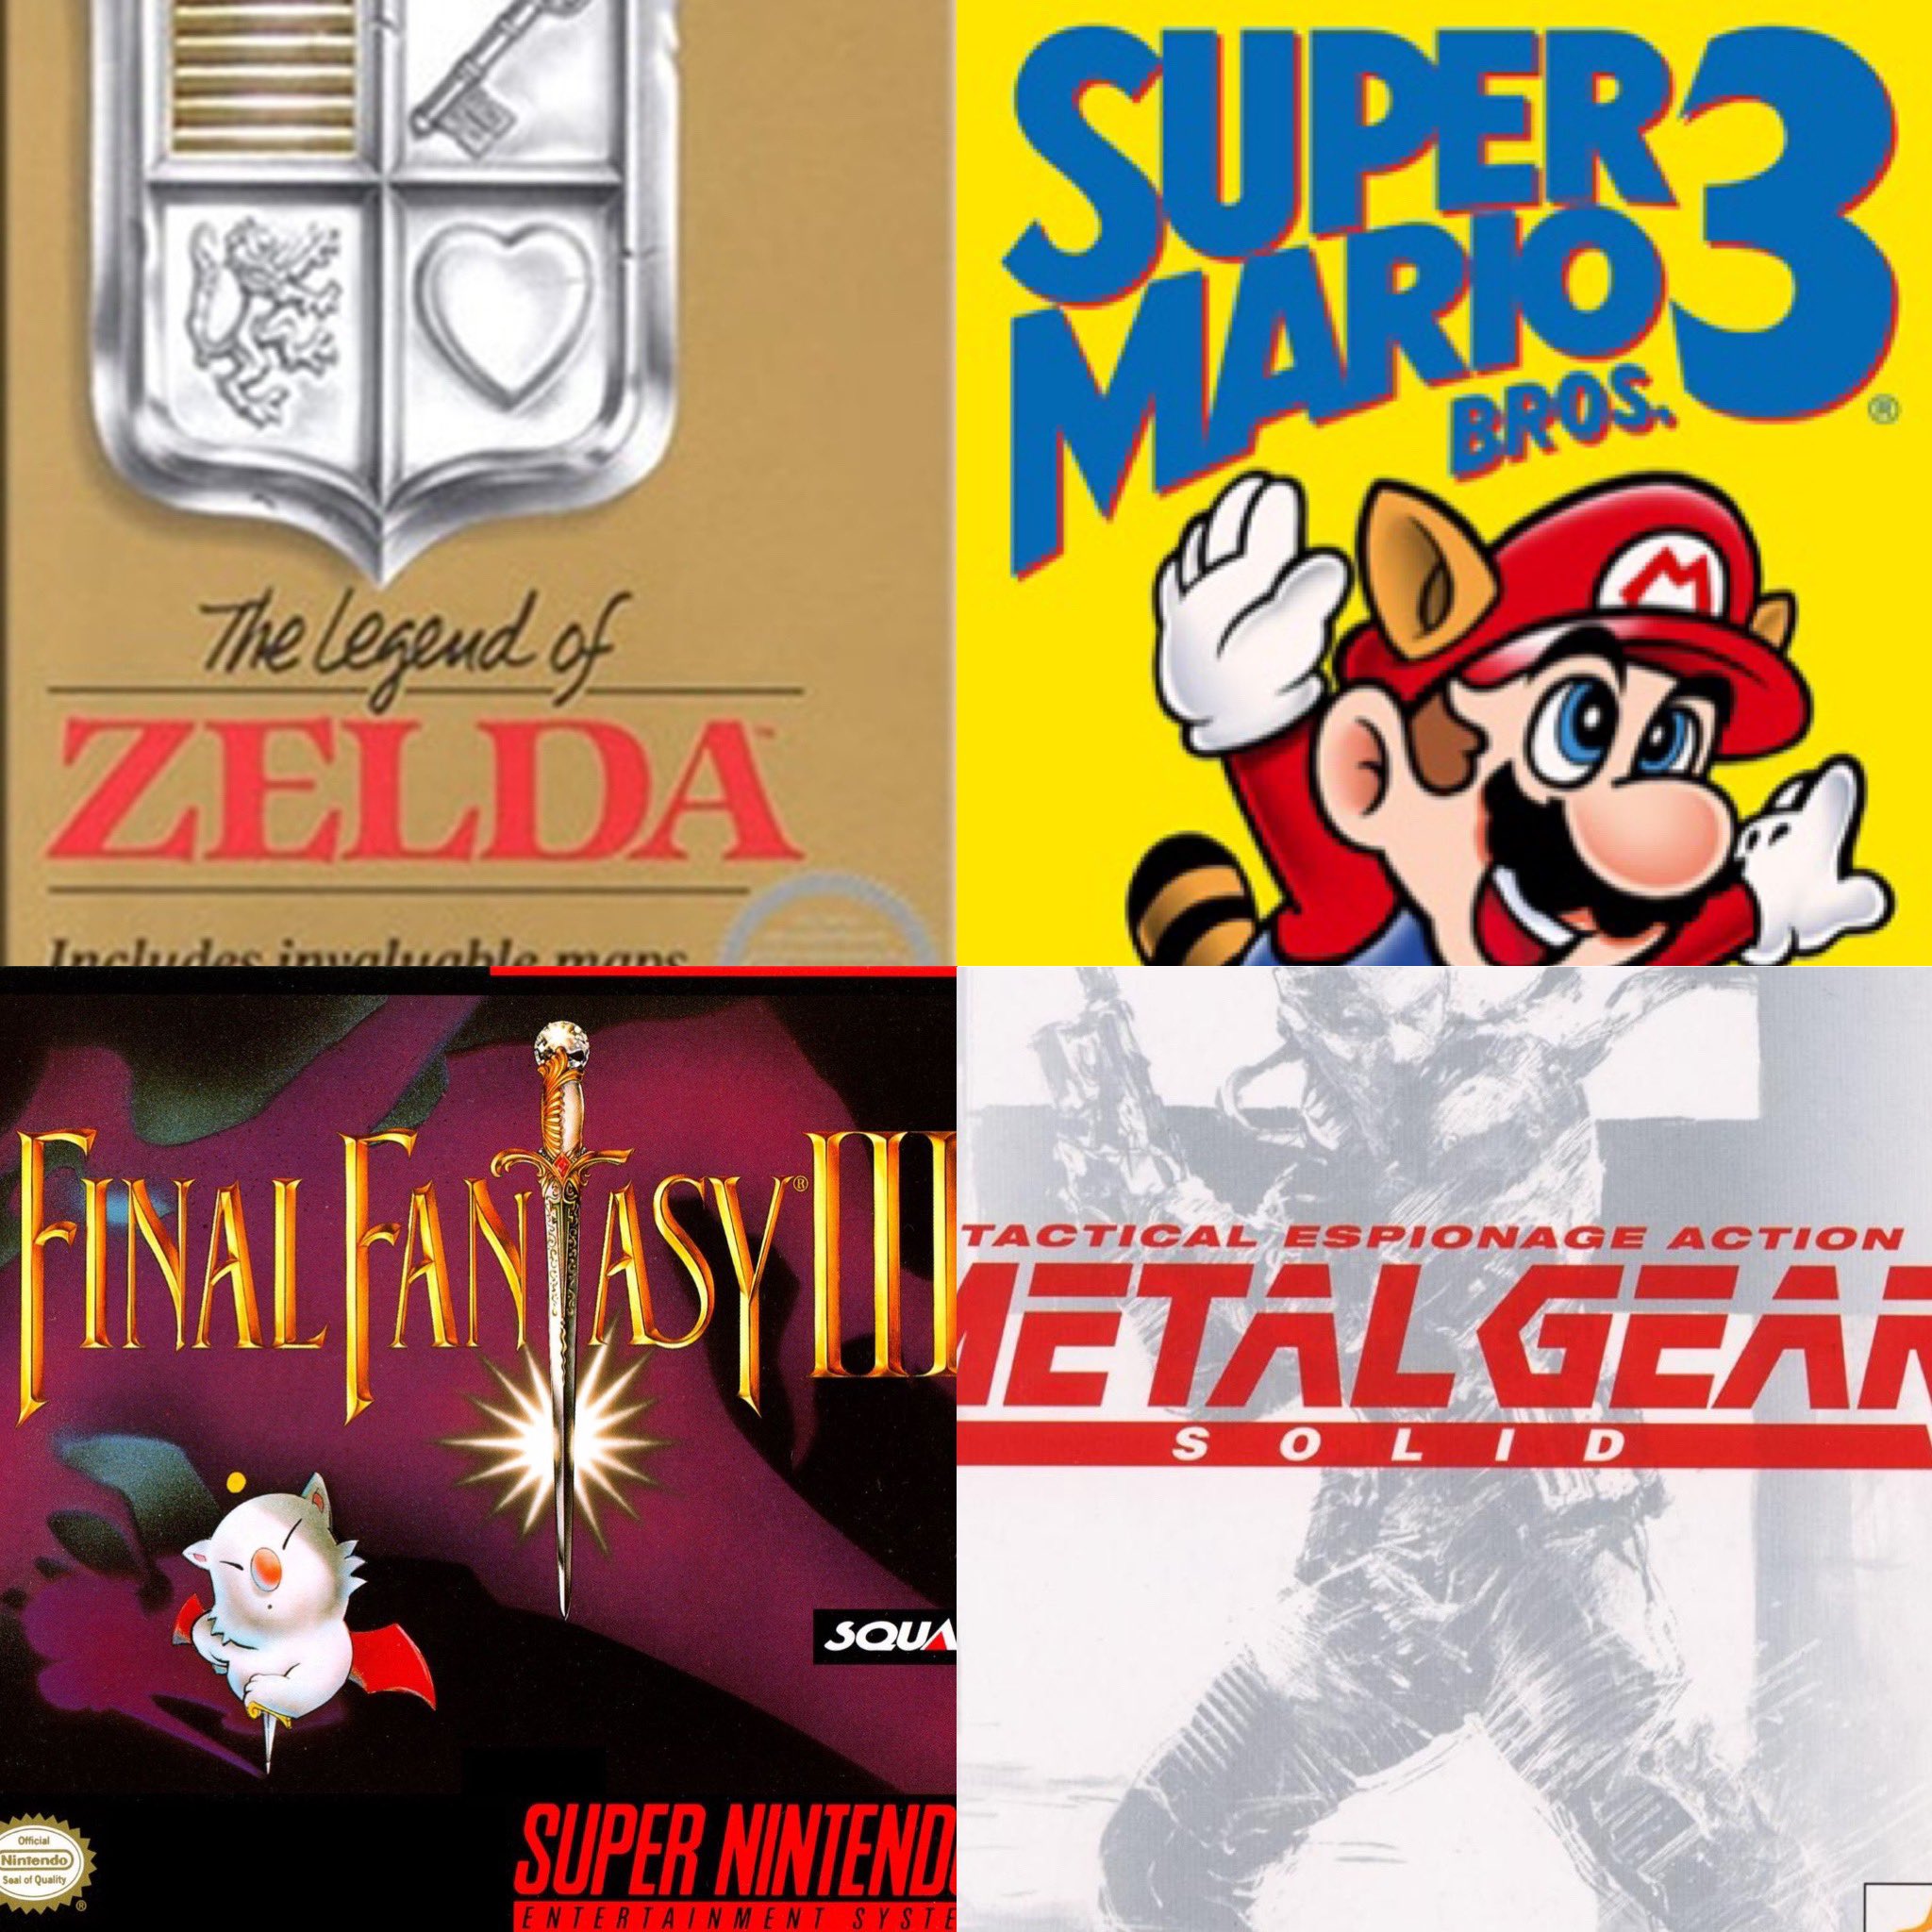 Accor humor Kwik تويتر \ Christopher Wehkamp على تويتر: "4 games that define me: Zelda:  Gateway to video games Mario 3: Best platformer ever made Final Fantasy3:  First rpg and caring about characters Metal Gear